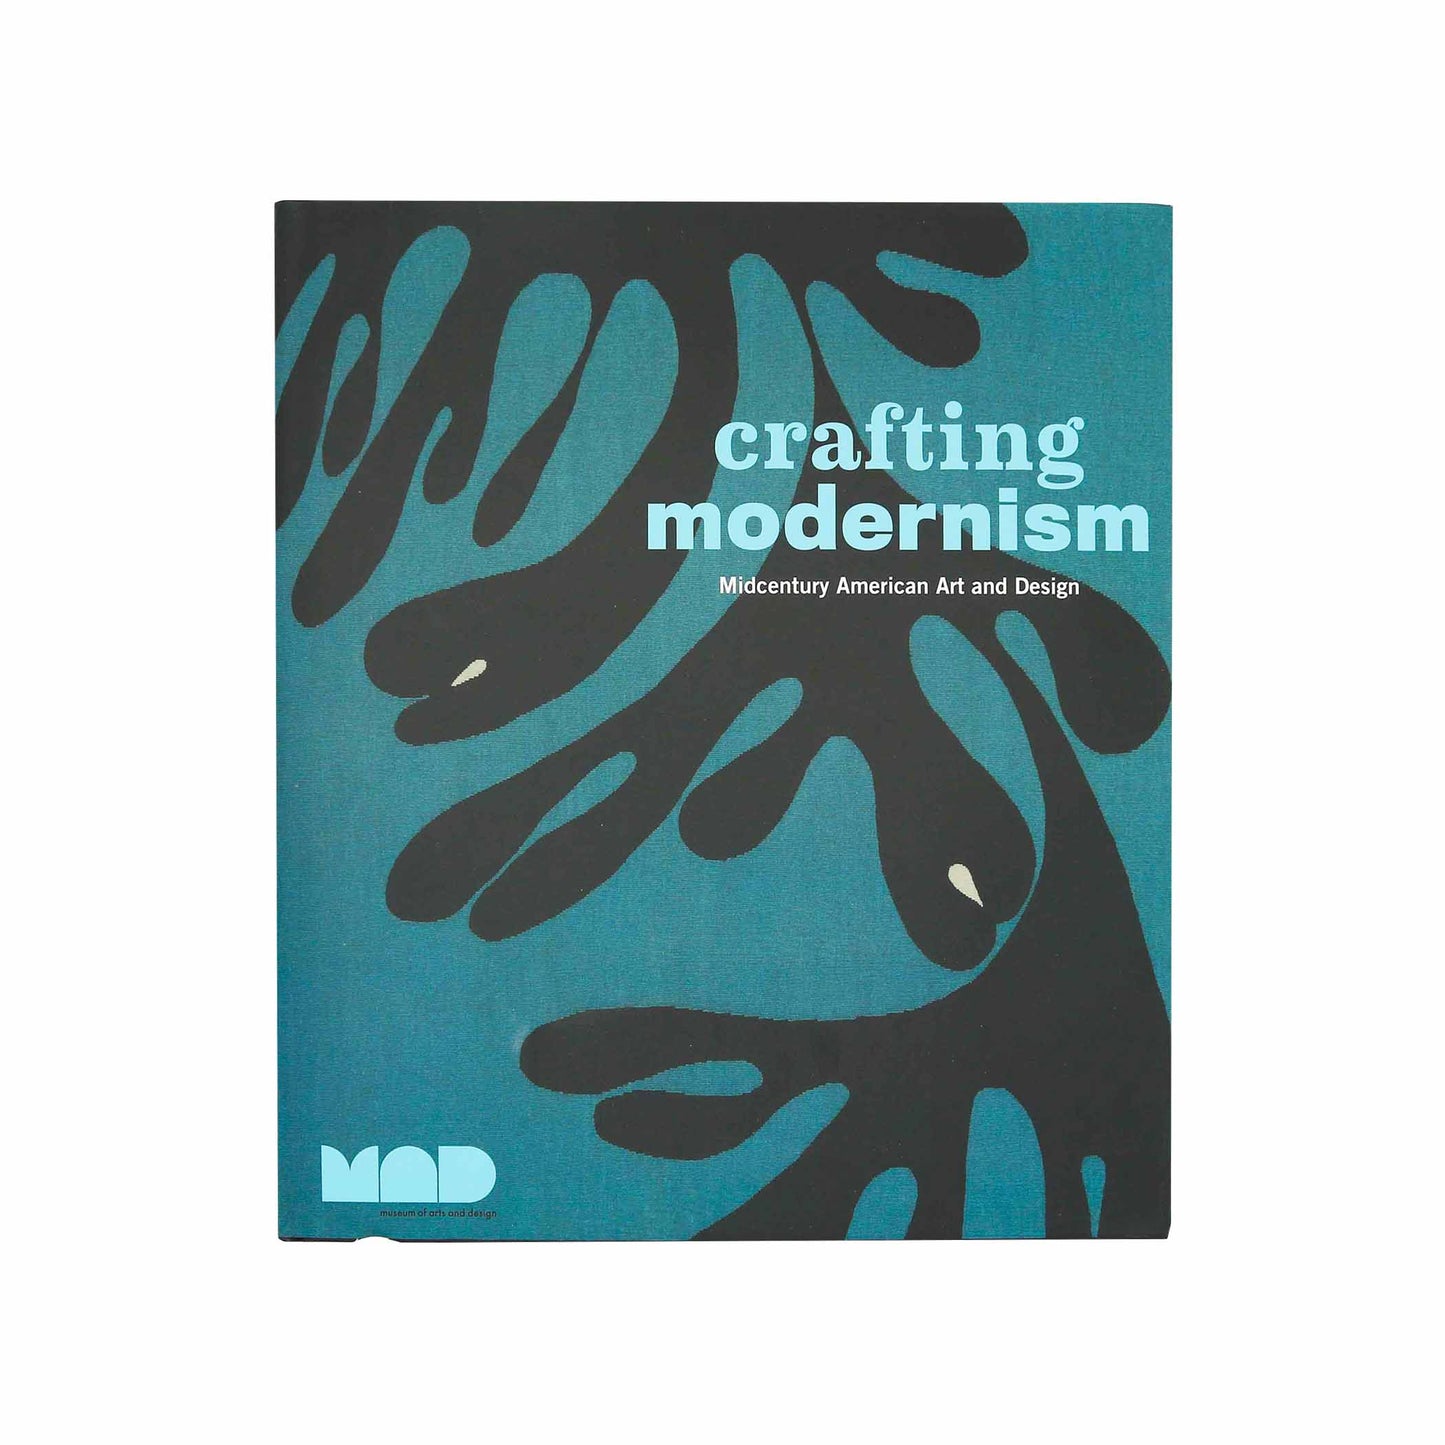 Crafting Modernism: Midcentury American Art and Design